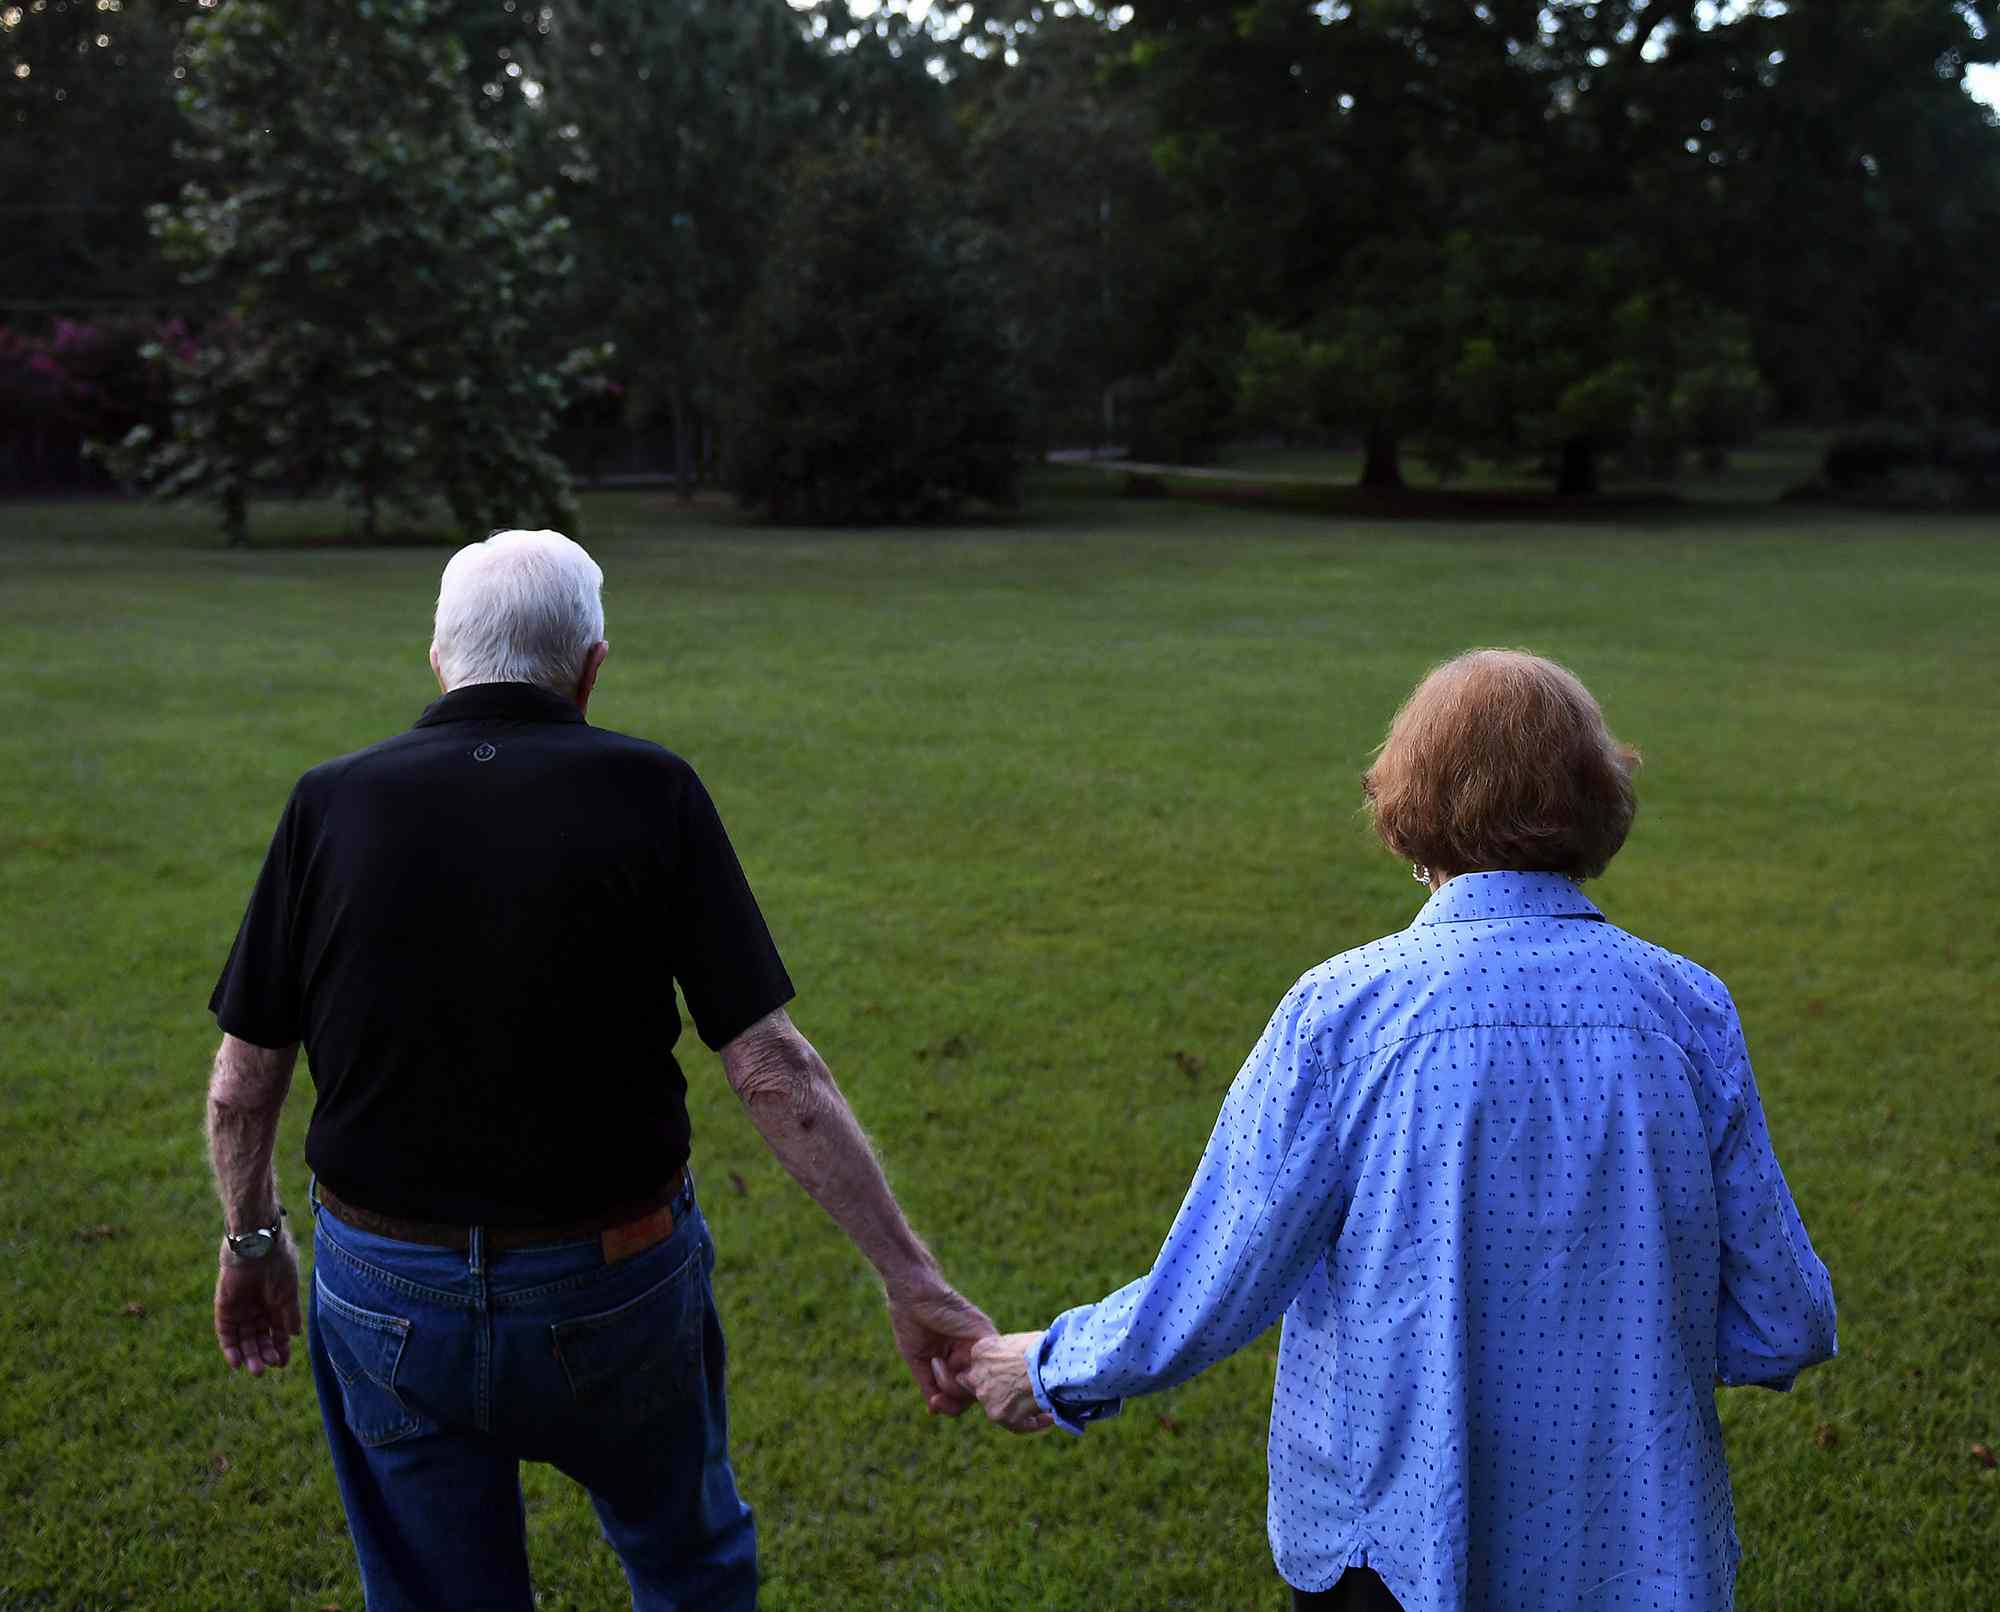 Former President of the United States, Jimmy Carter walks with his wife, former First Lady, Rosalynn Carter towards their home following dinner at a friend's home on Saturday August 04, 2018 in Plains, GA. Born in Plains, GA, President Carter stayed in the town following his presidency